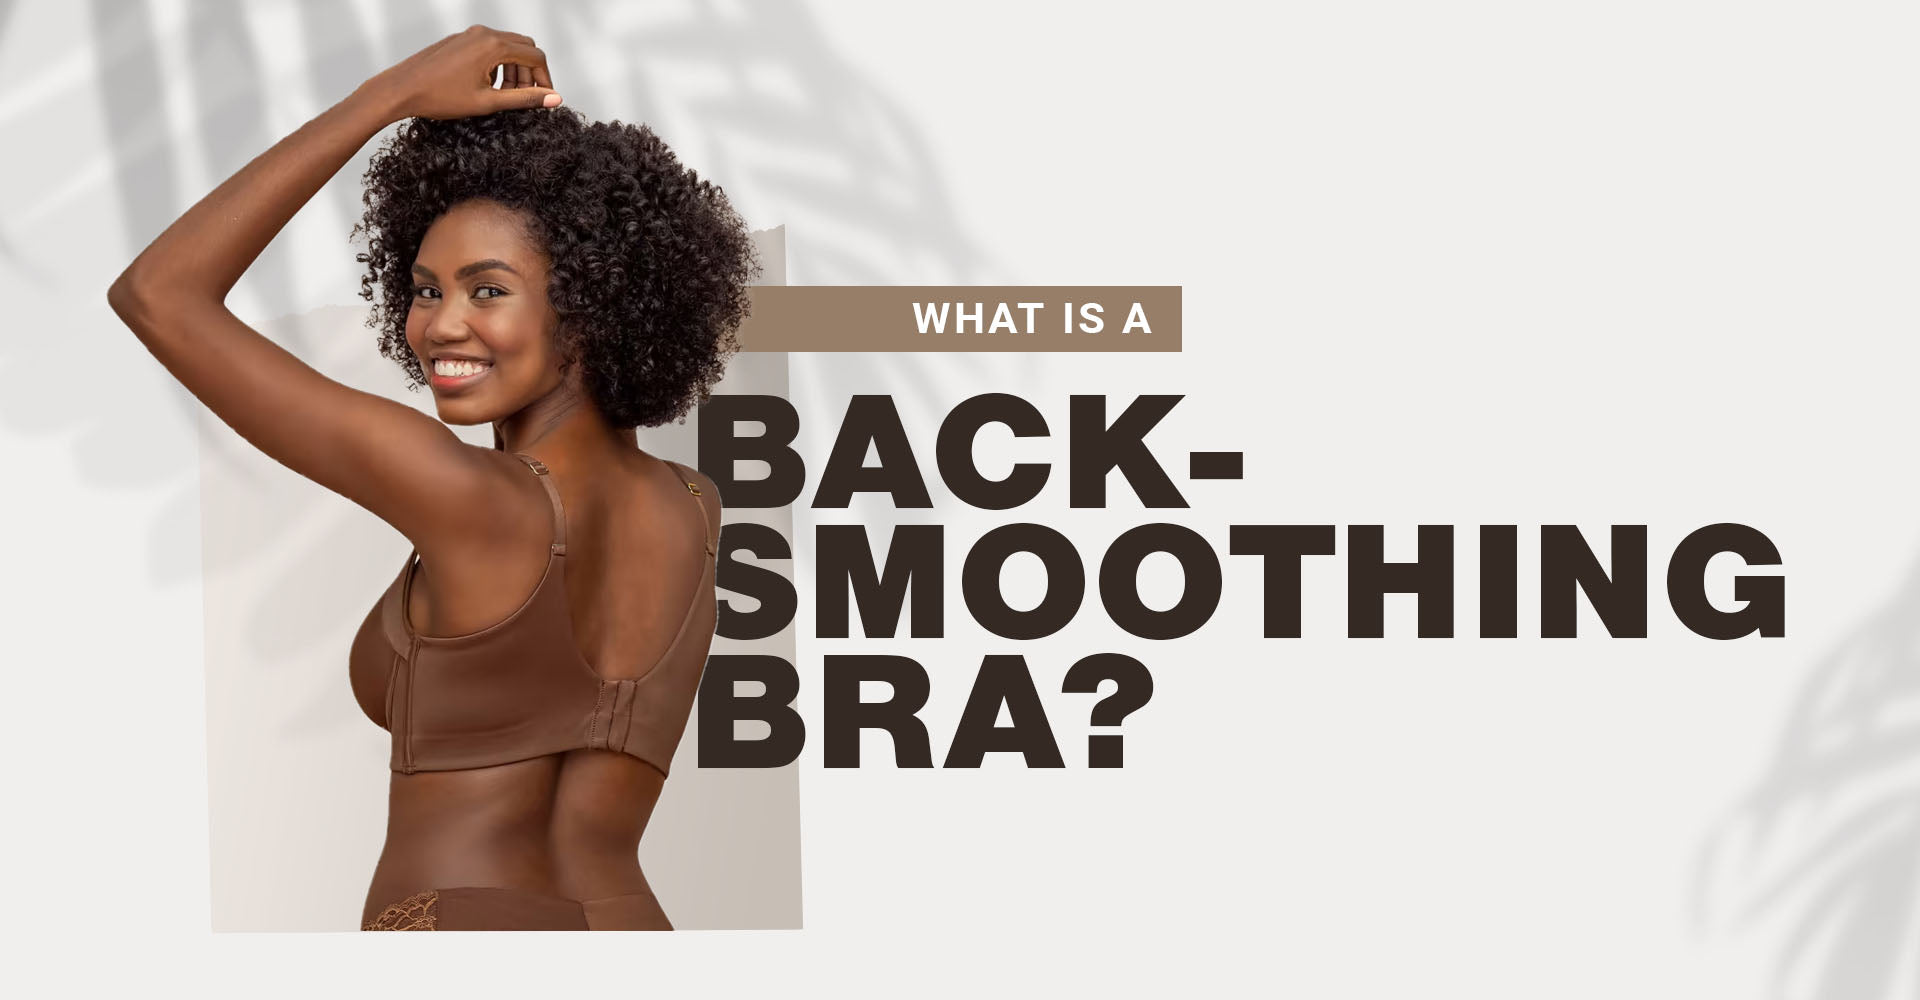 What Is a Back-Smoothing Bra & What Are Its Benefits?